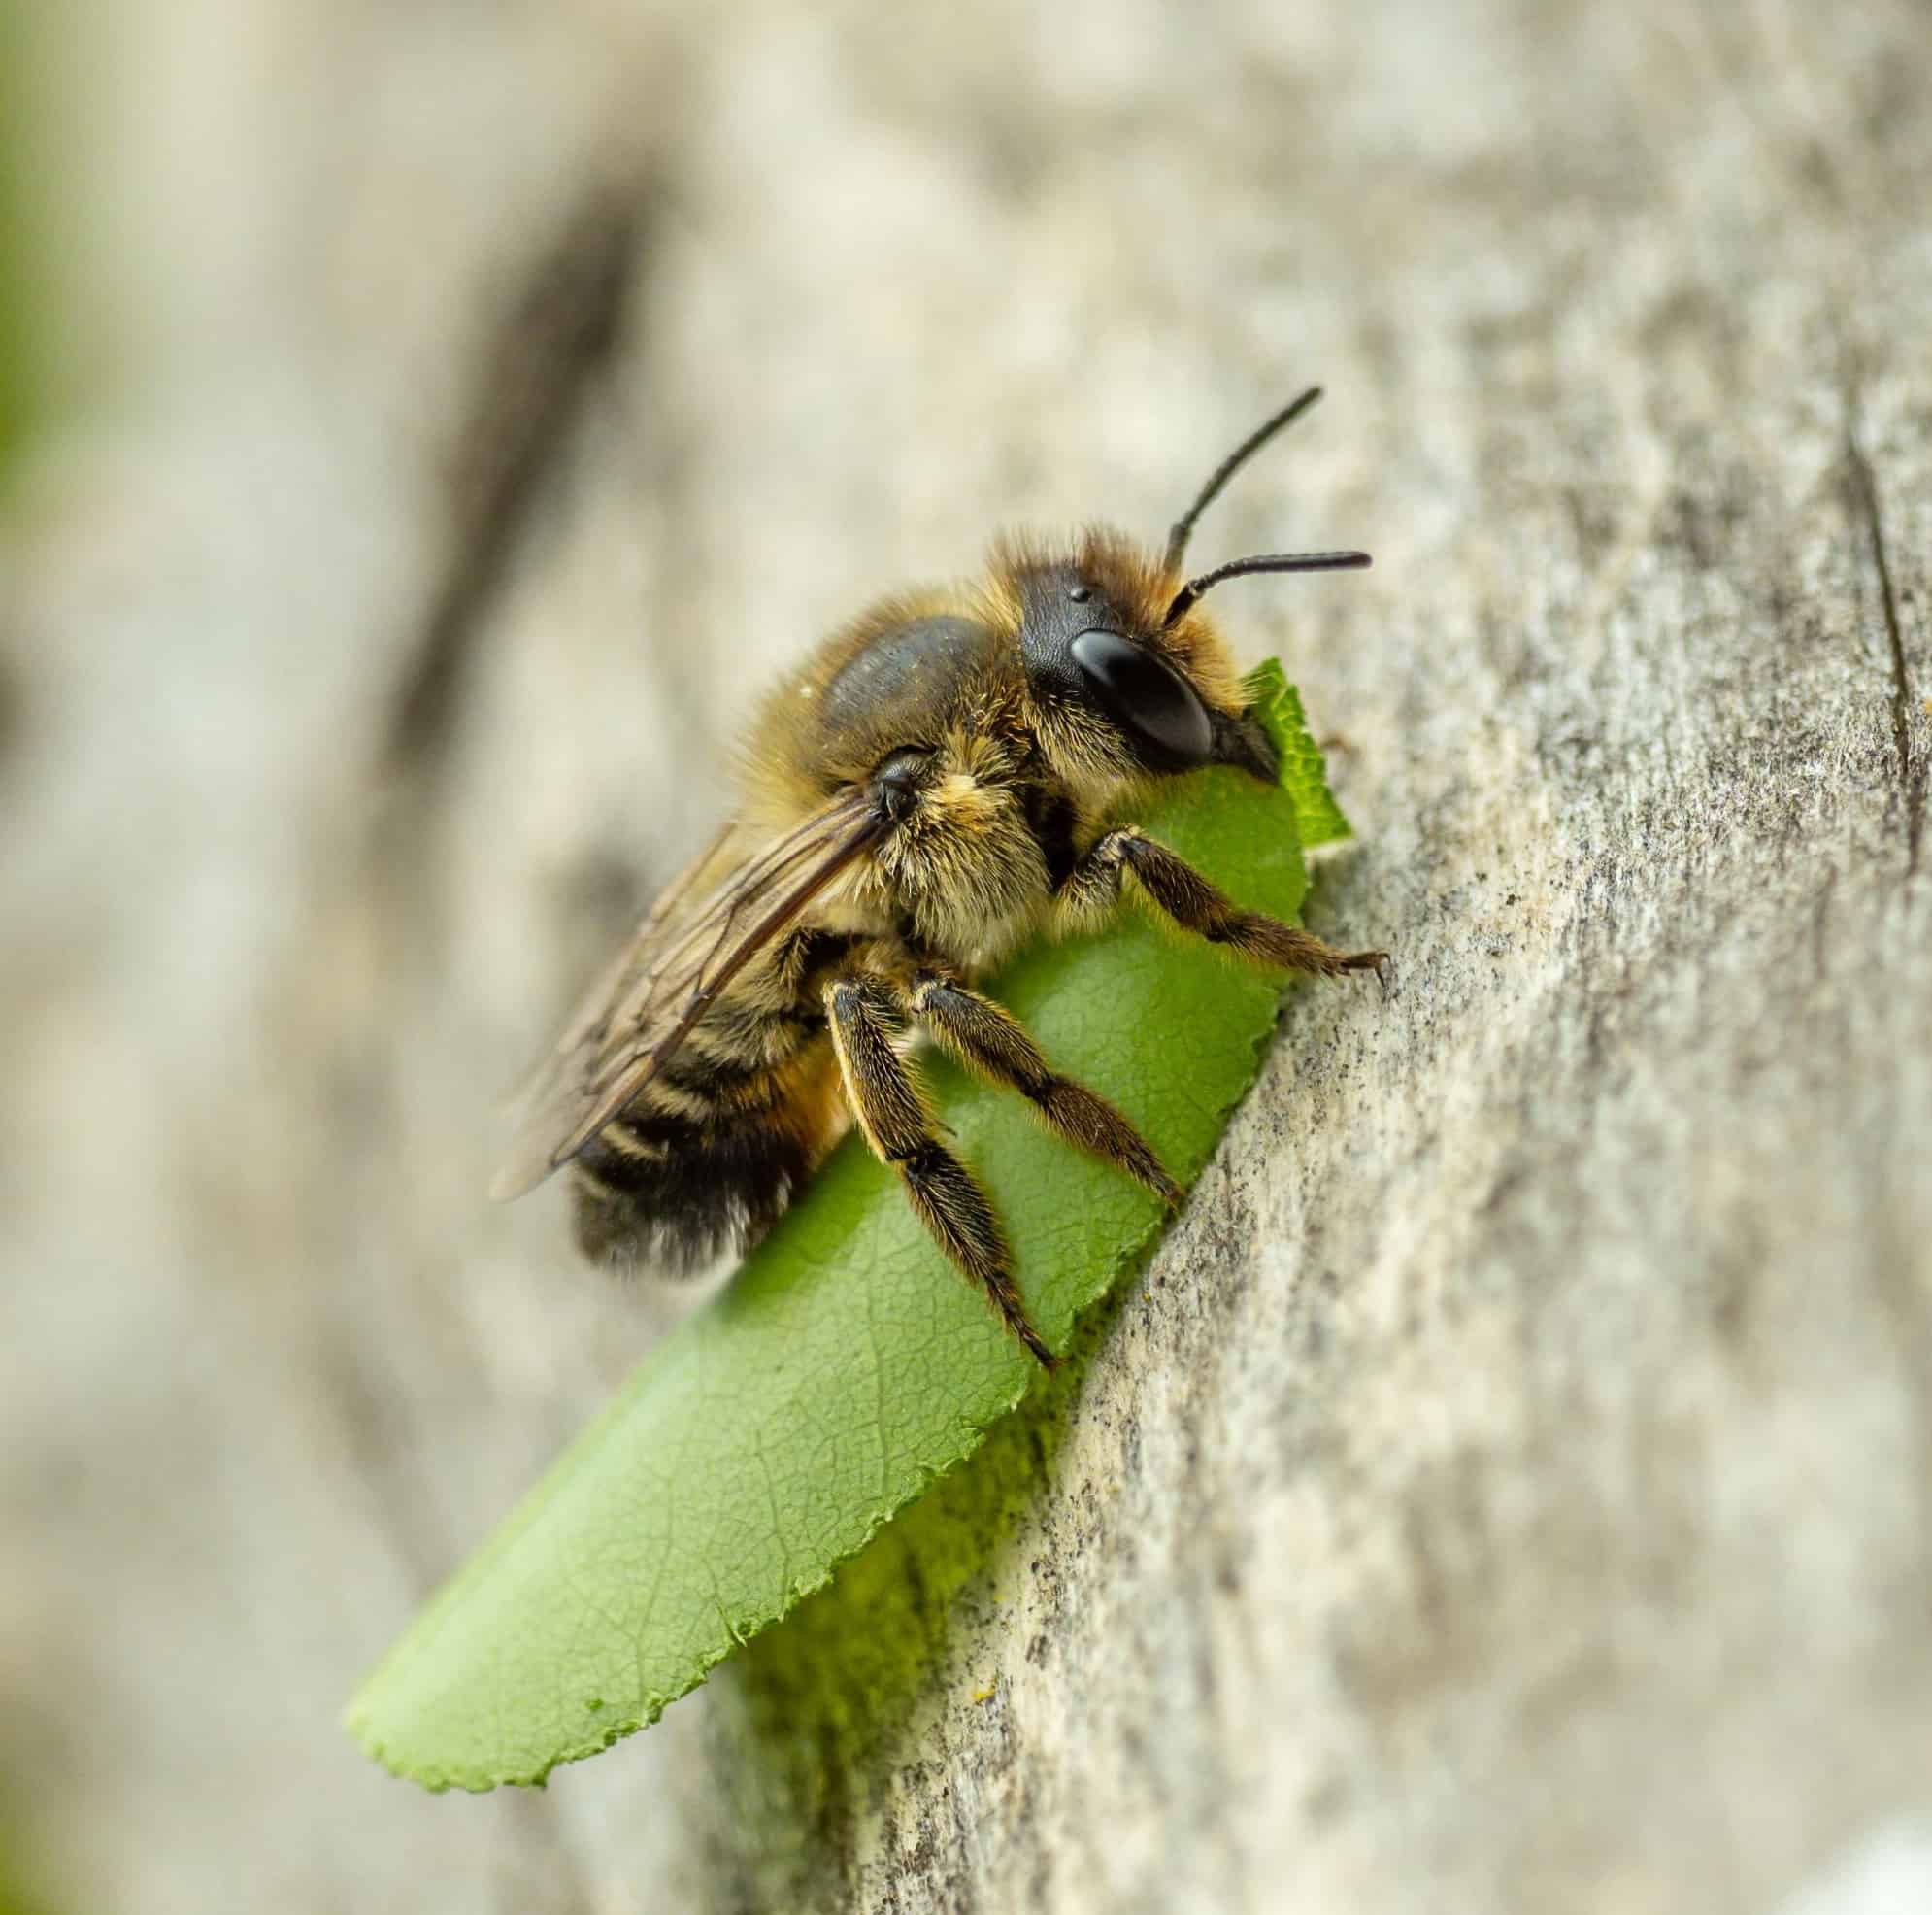 A macro shot of a leafcutter bee (Megachile species) seen carrying a leaf back to its nest in July.